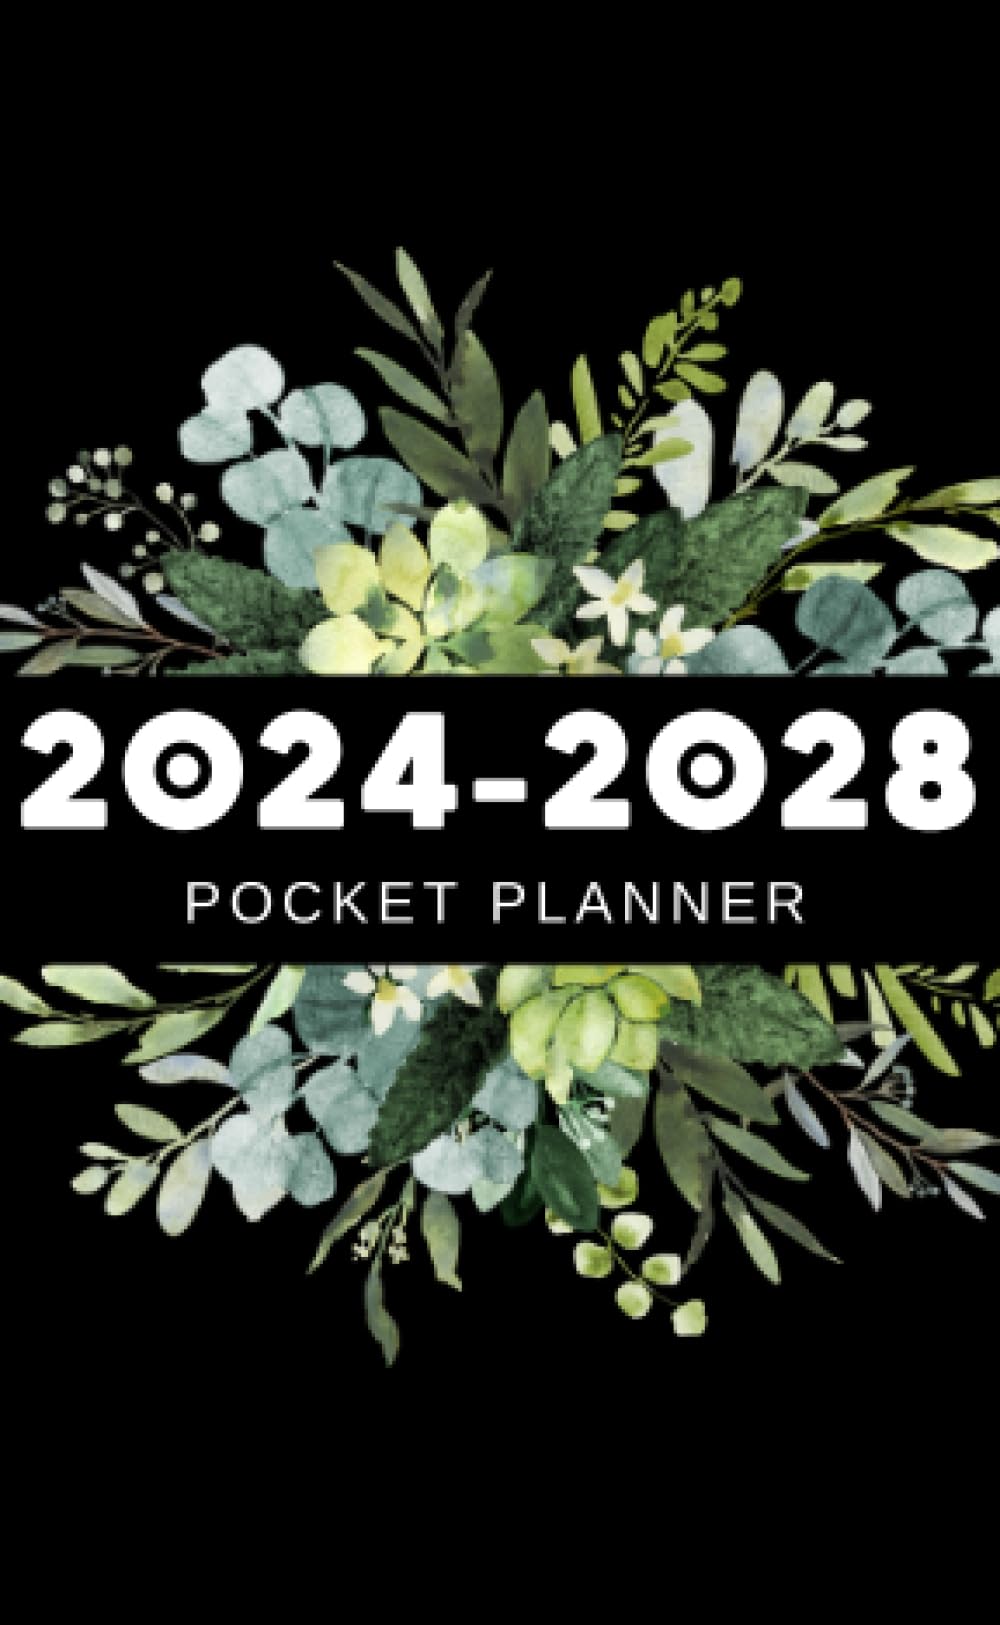 2024-2028 Pocket Planner: 5 Years Monthly and Weekly Calendar From January 2024 To December 2028 for Purse